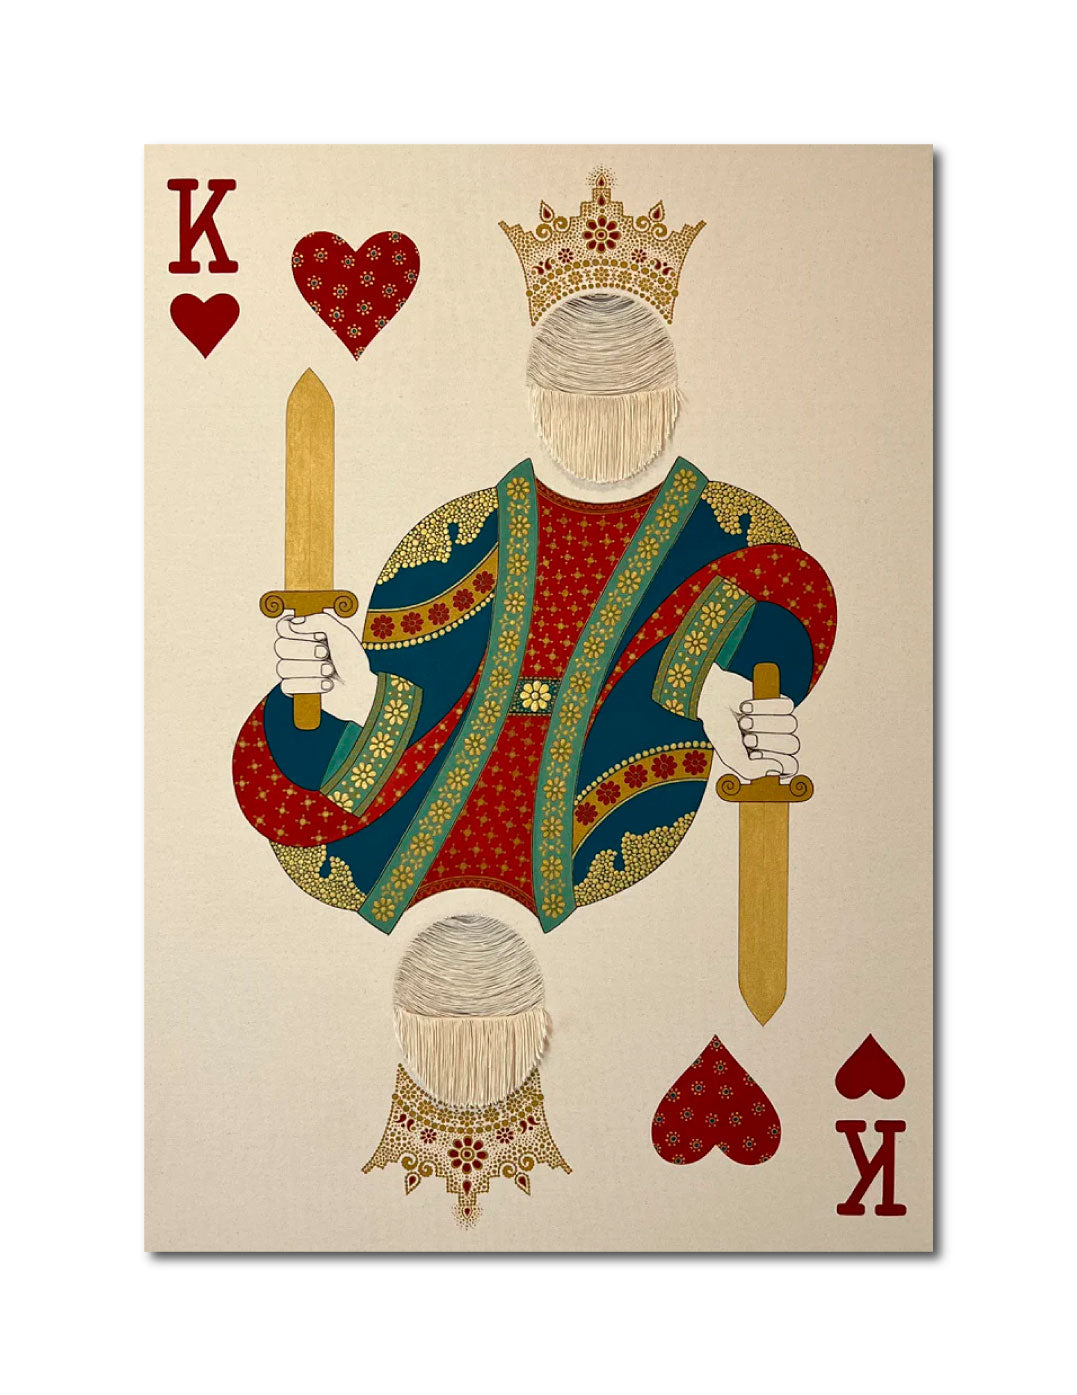 'KING OF HEARTS' - Acrylic on Canvas